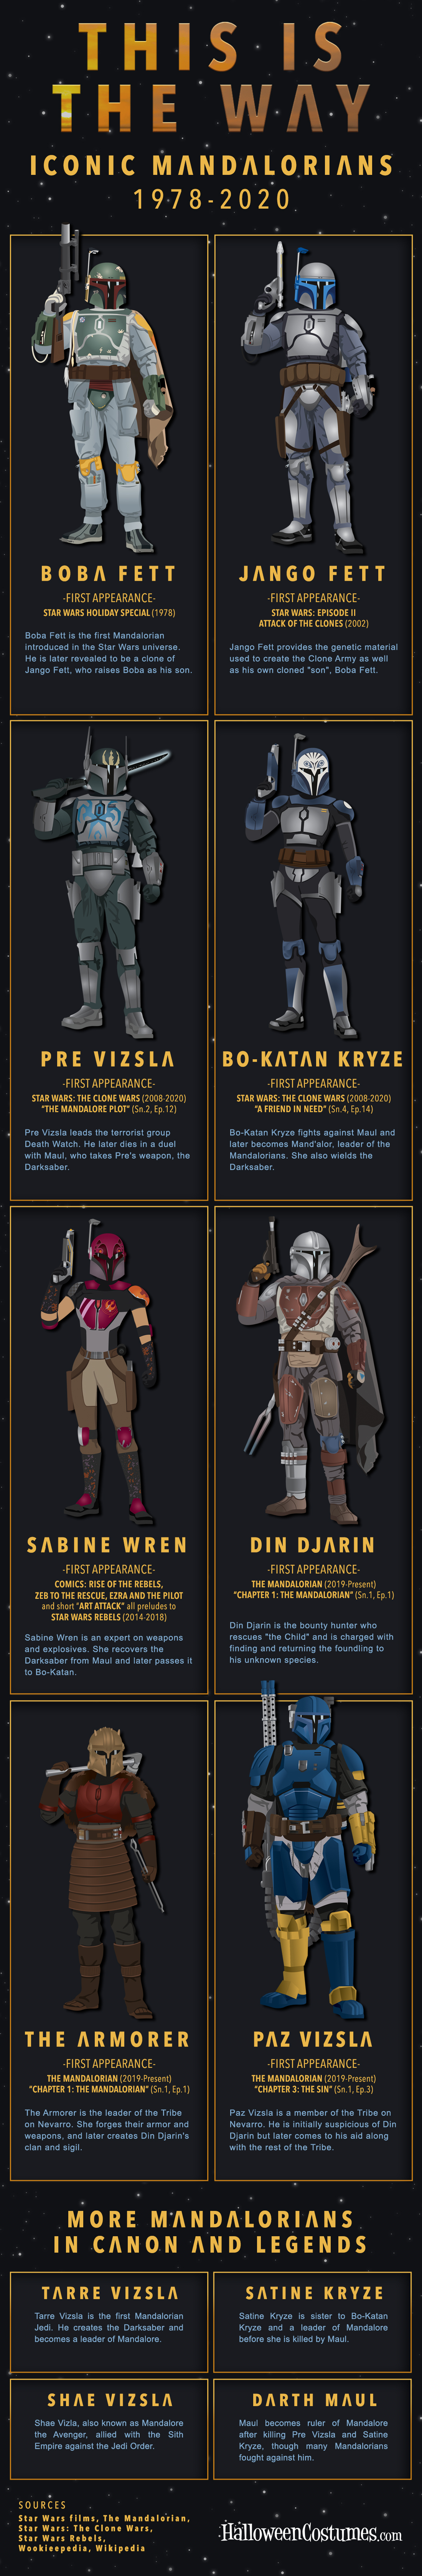 This Is the Way: Iconic Mandalorians from 1978 to 2020